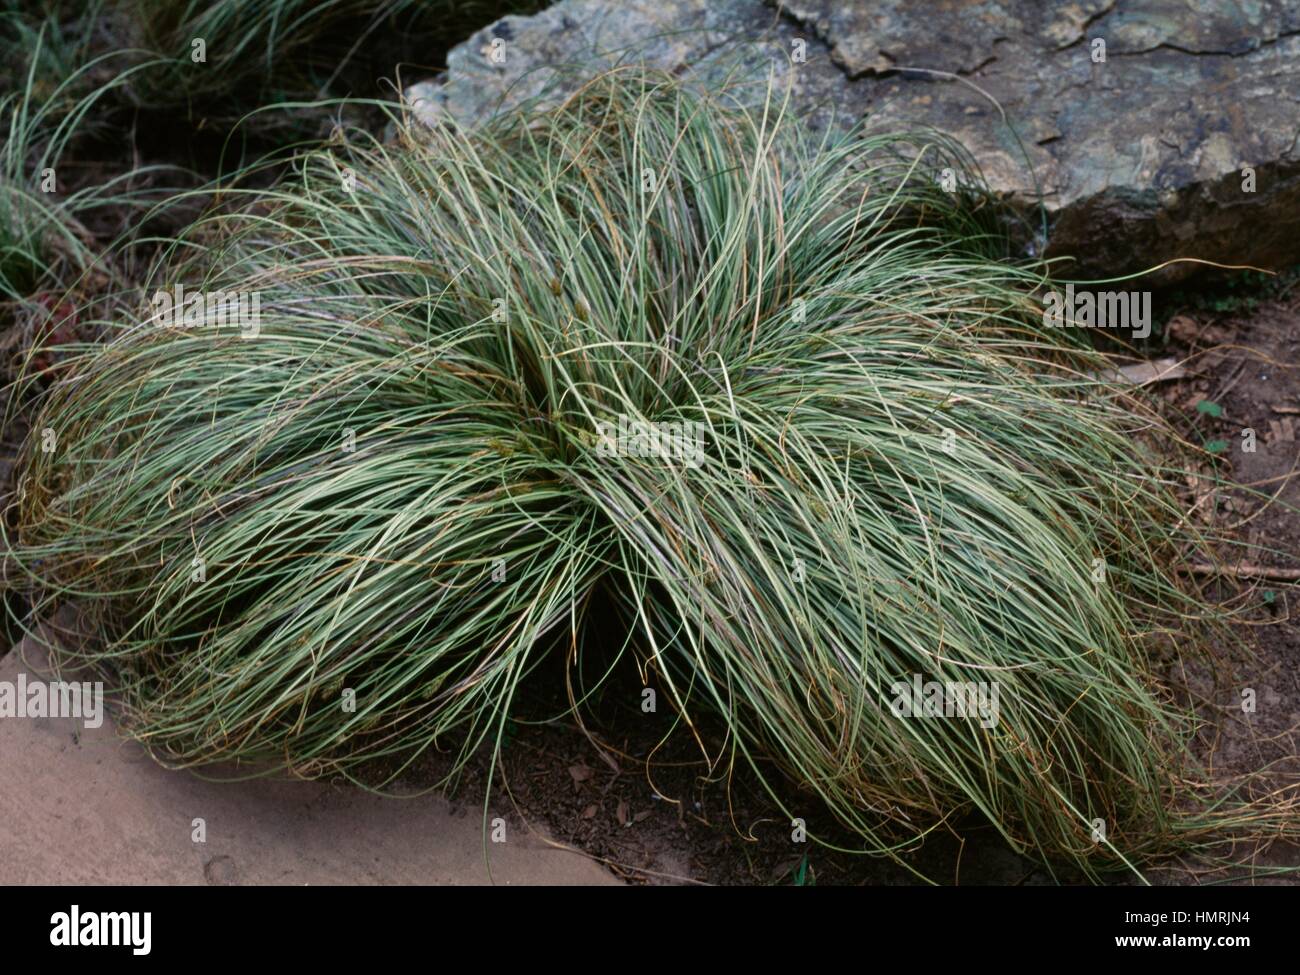 Frosted curls sedge (Carex albula Frosted Curls), Cyperaceae. Stock Photo